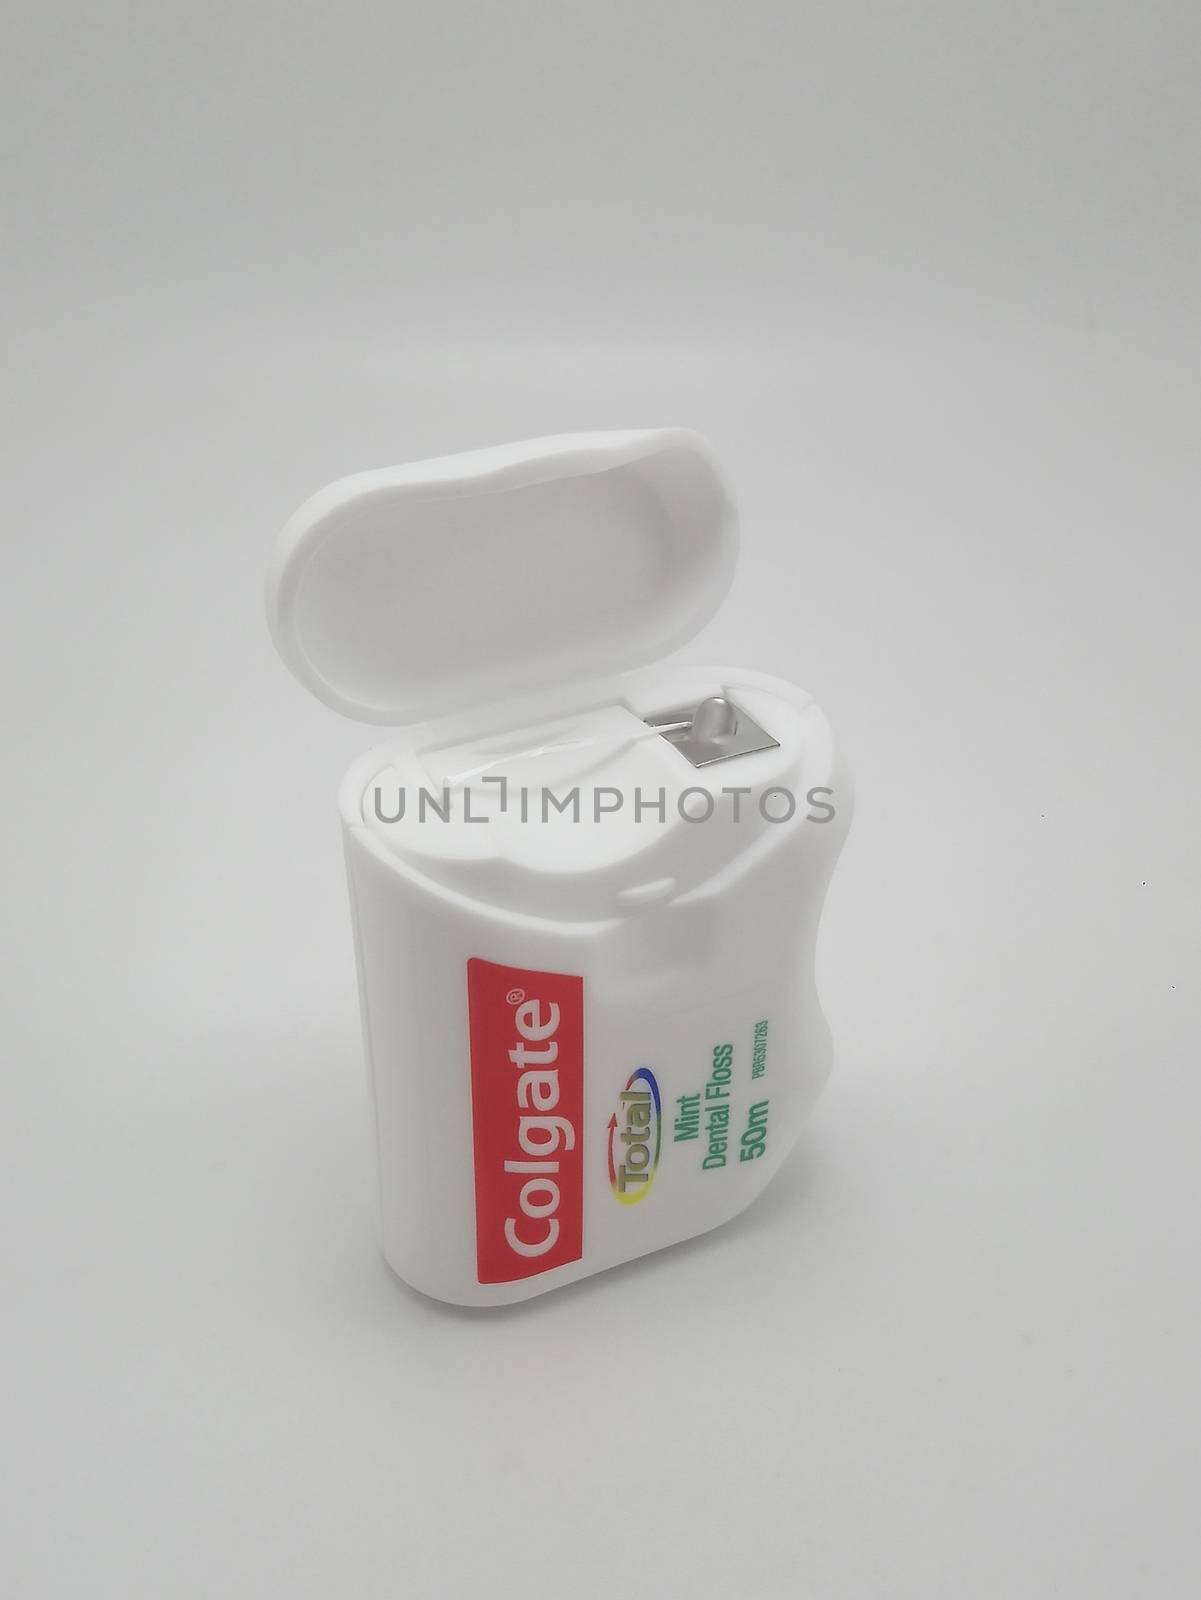 Colgate total mint dental floss in Manila, Philippines by imwaltersy